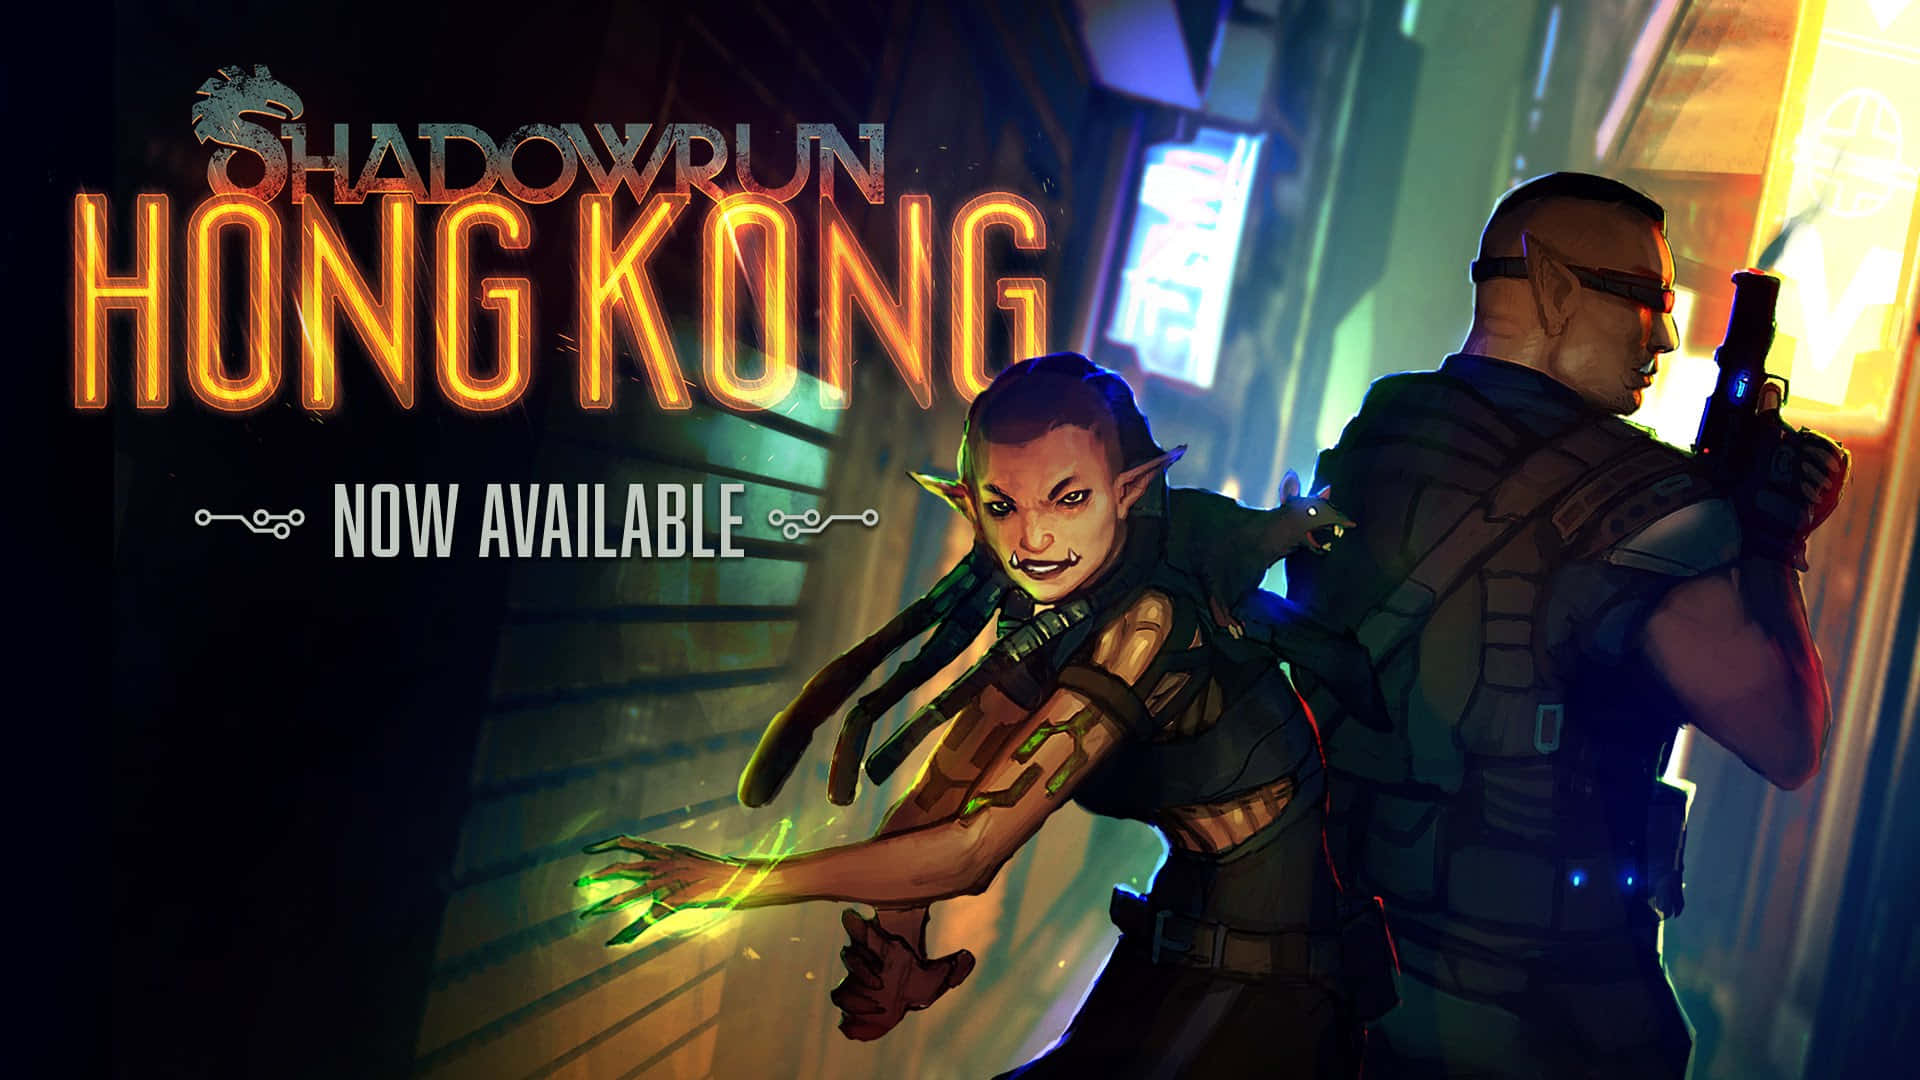 A glimpse into the dangerous yet thrilling world of Shadowrun Wallpaper